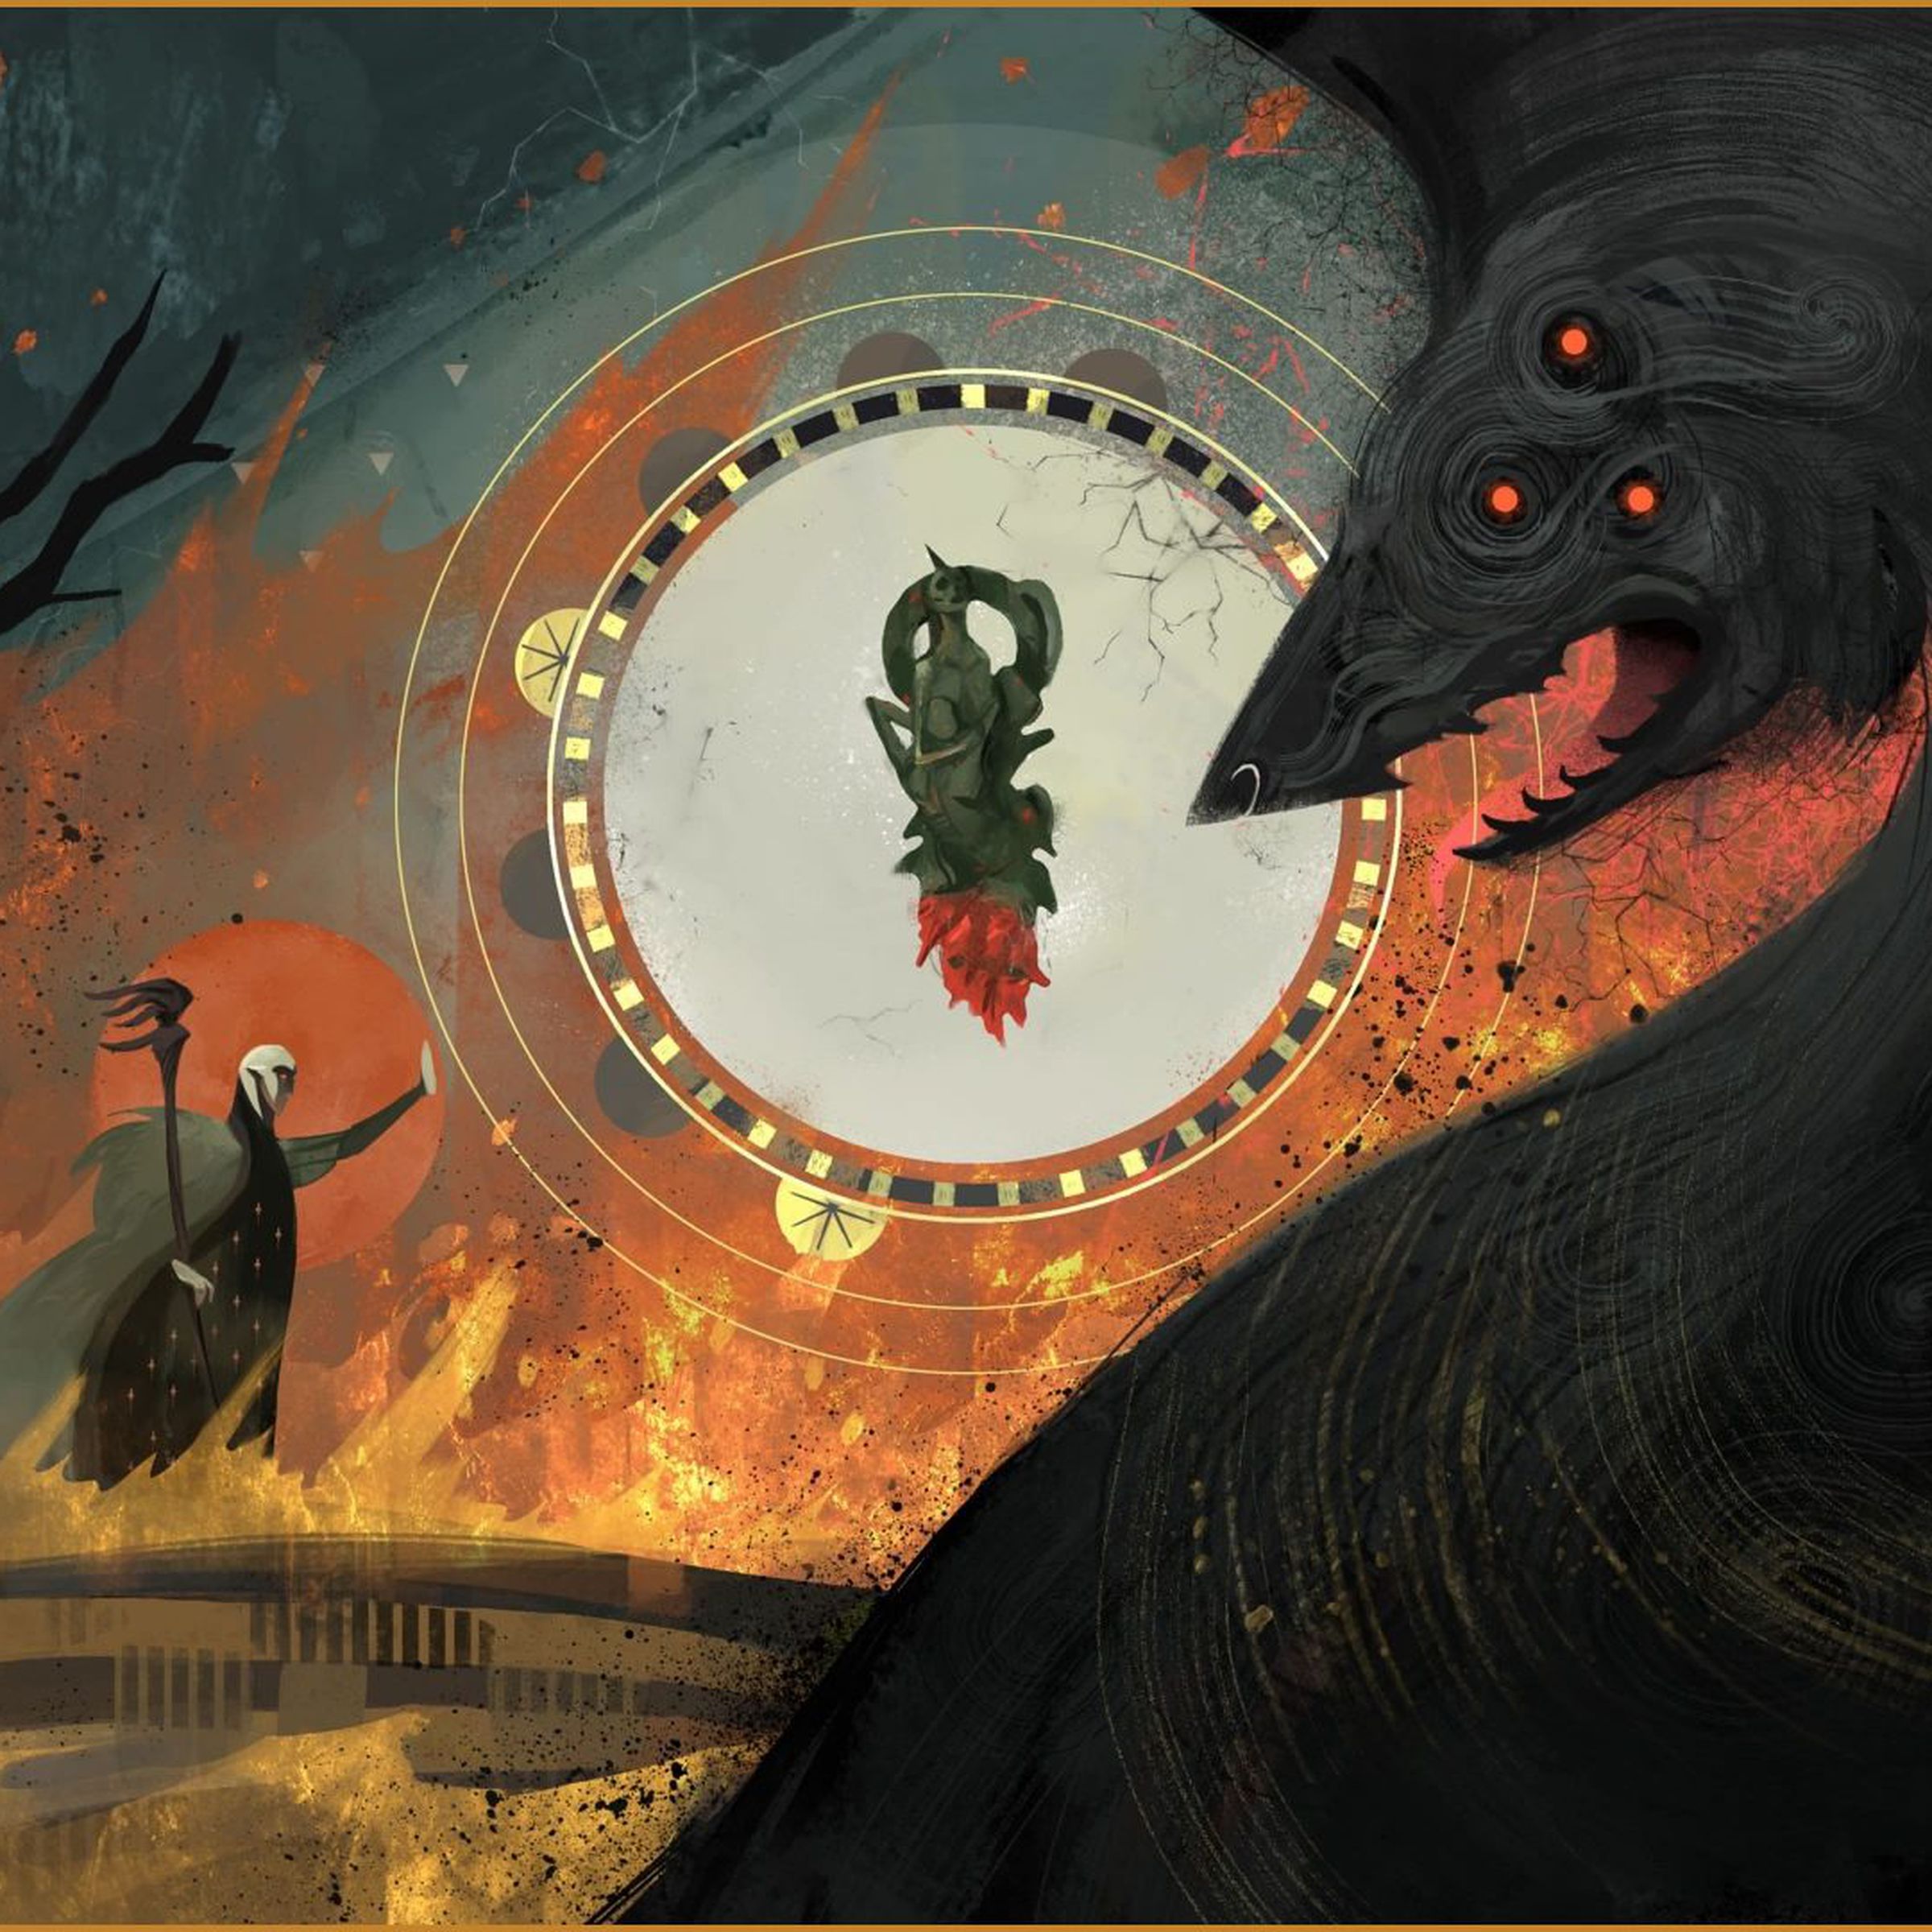 Concept art from Dragon Age Dreadwolf featuring a stylized painting of a bald elf wreathed in flame holding back a large wolf as a red lyrium heart glows between them